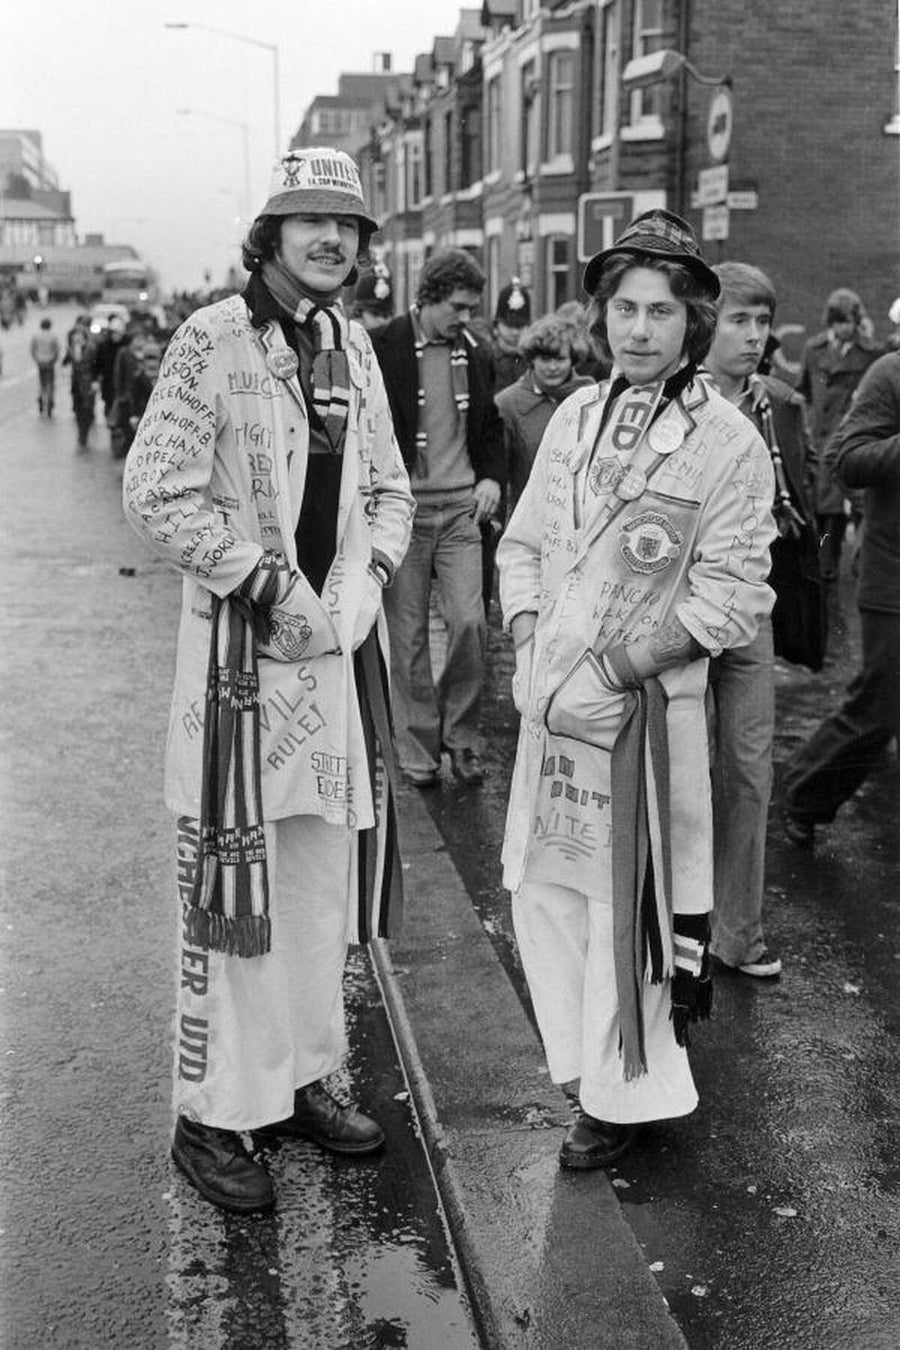 Two Manchester United Fans in Butcher Coats by Iain SP Reid - c. 1976